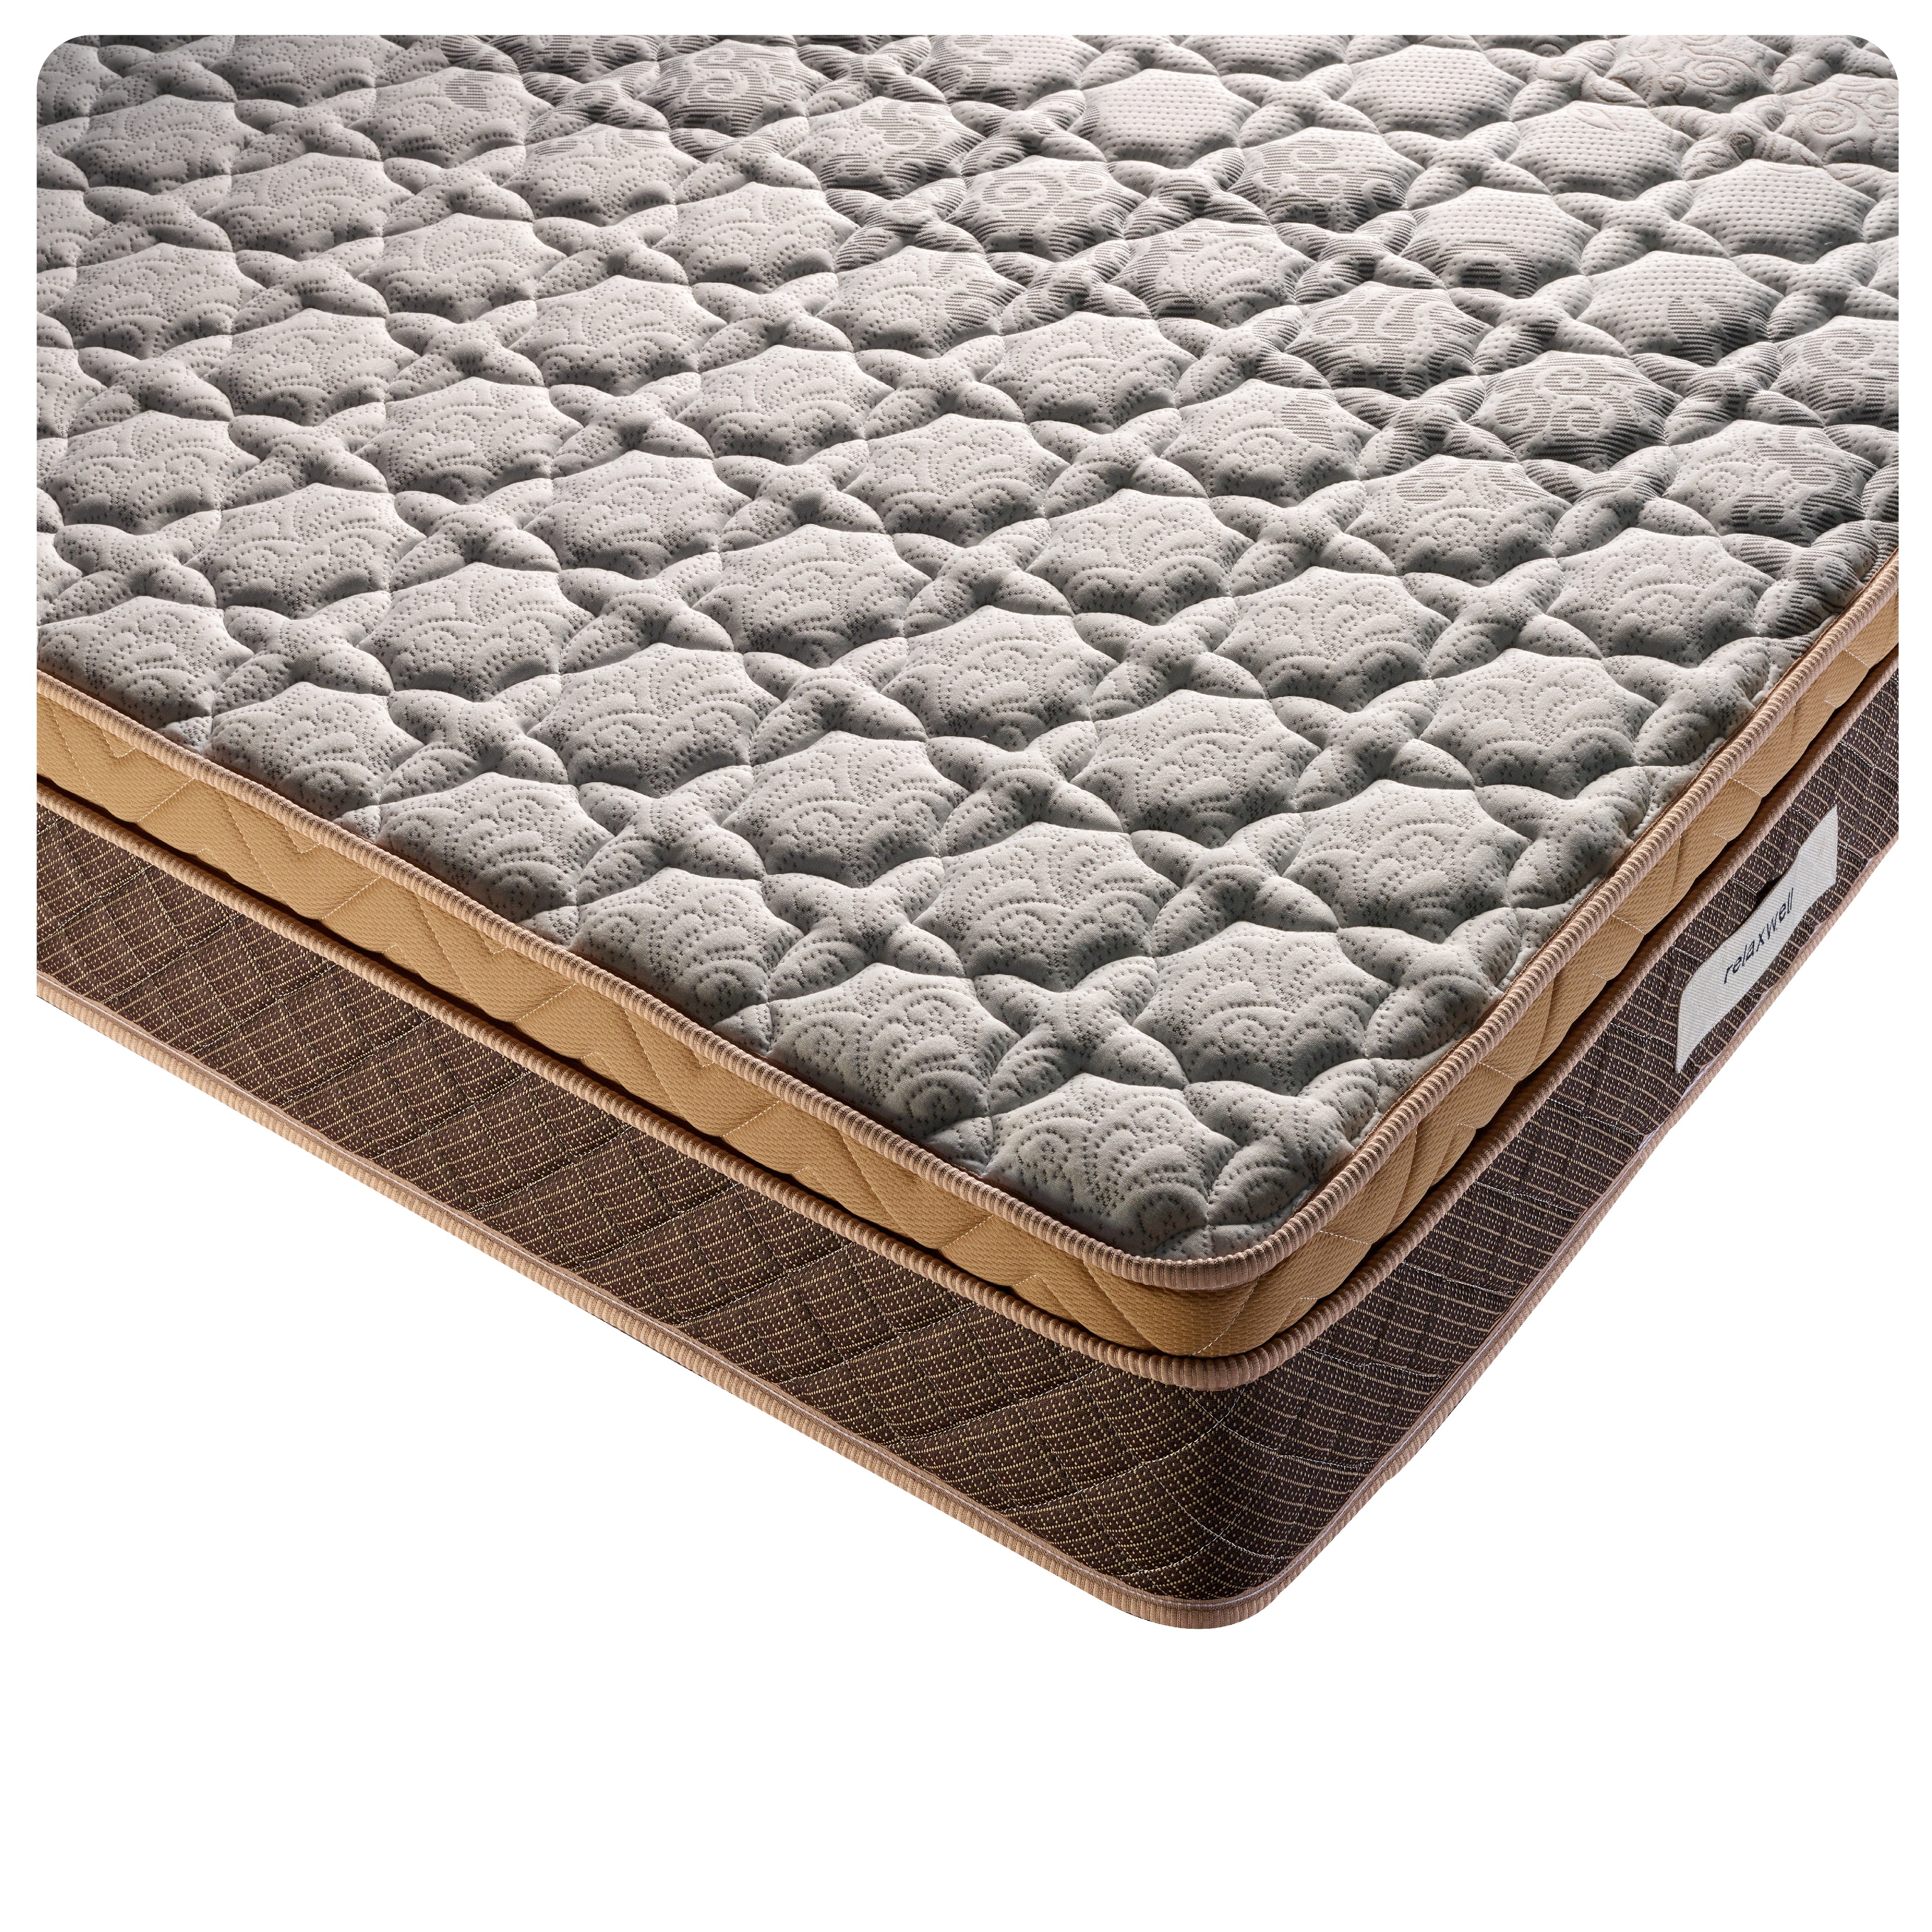 Buy Comfort Pocketed Spring Mattress with Euro Top Finish